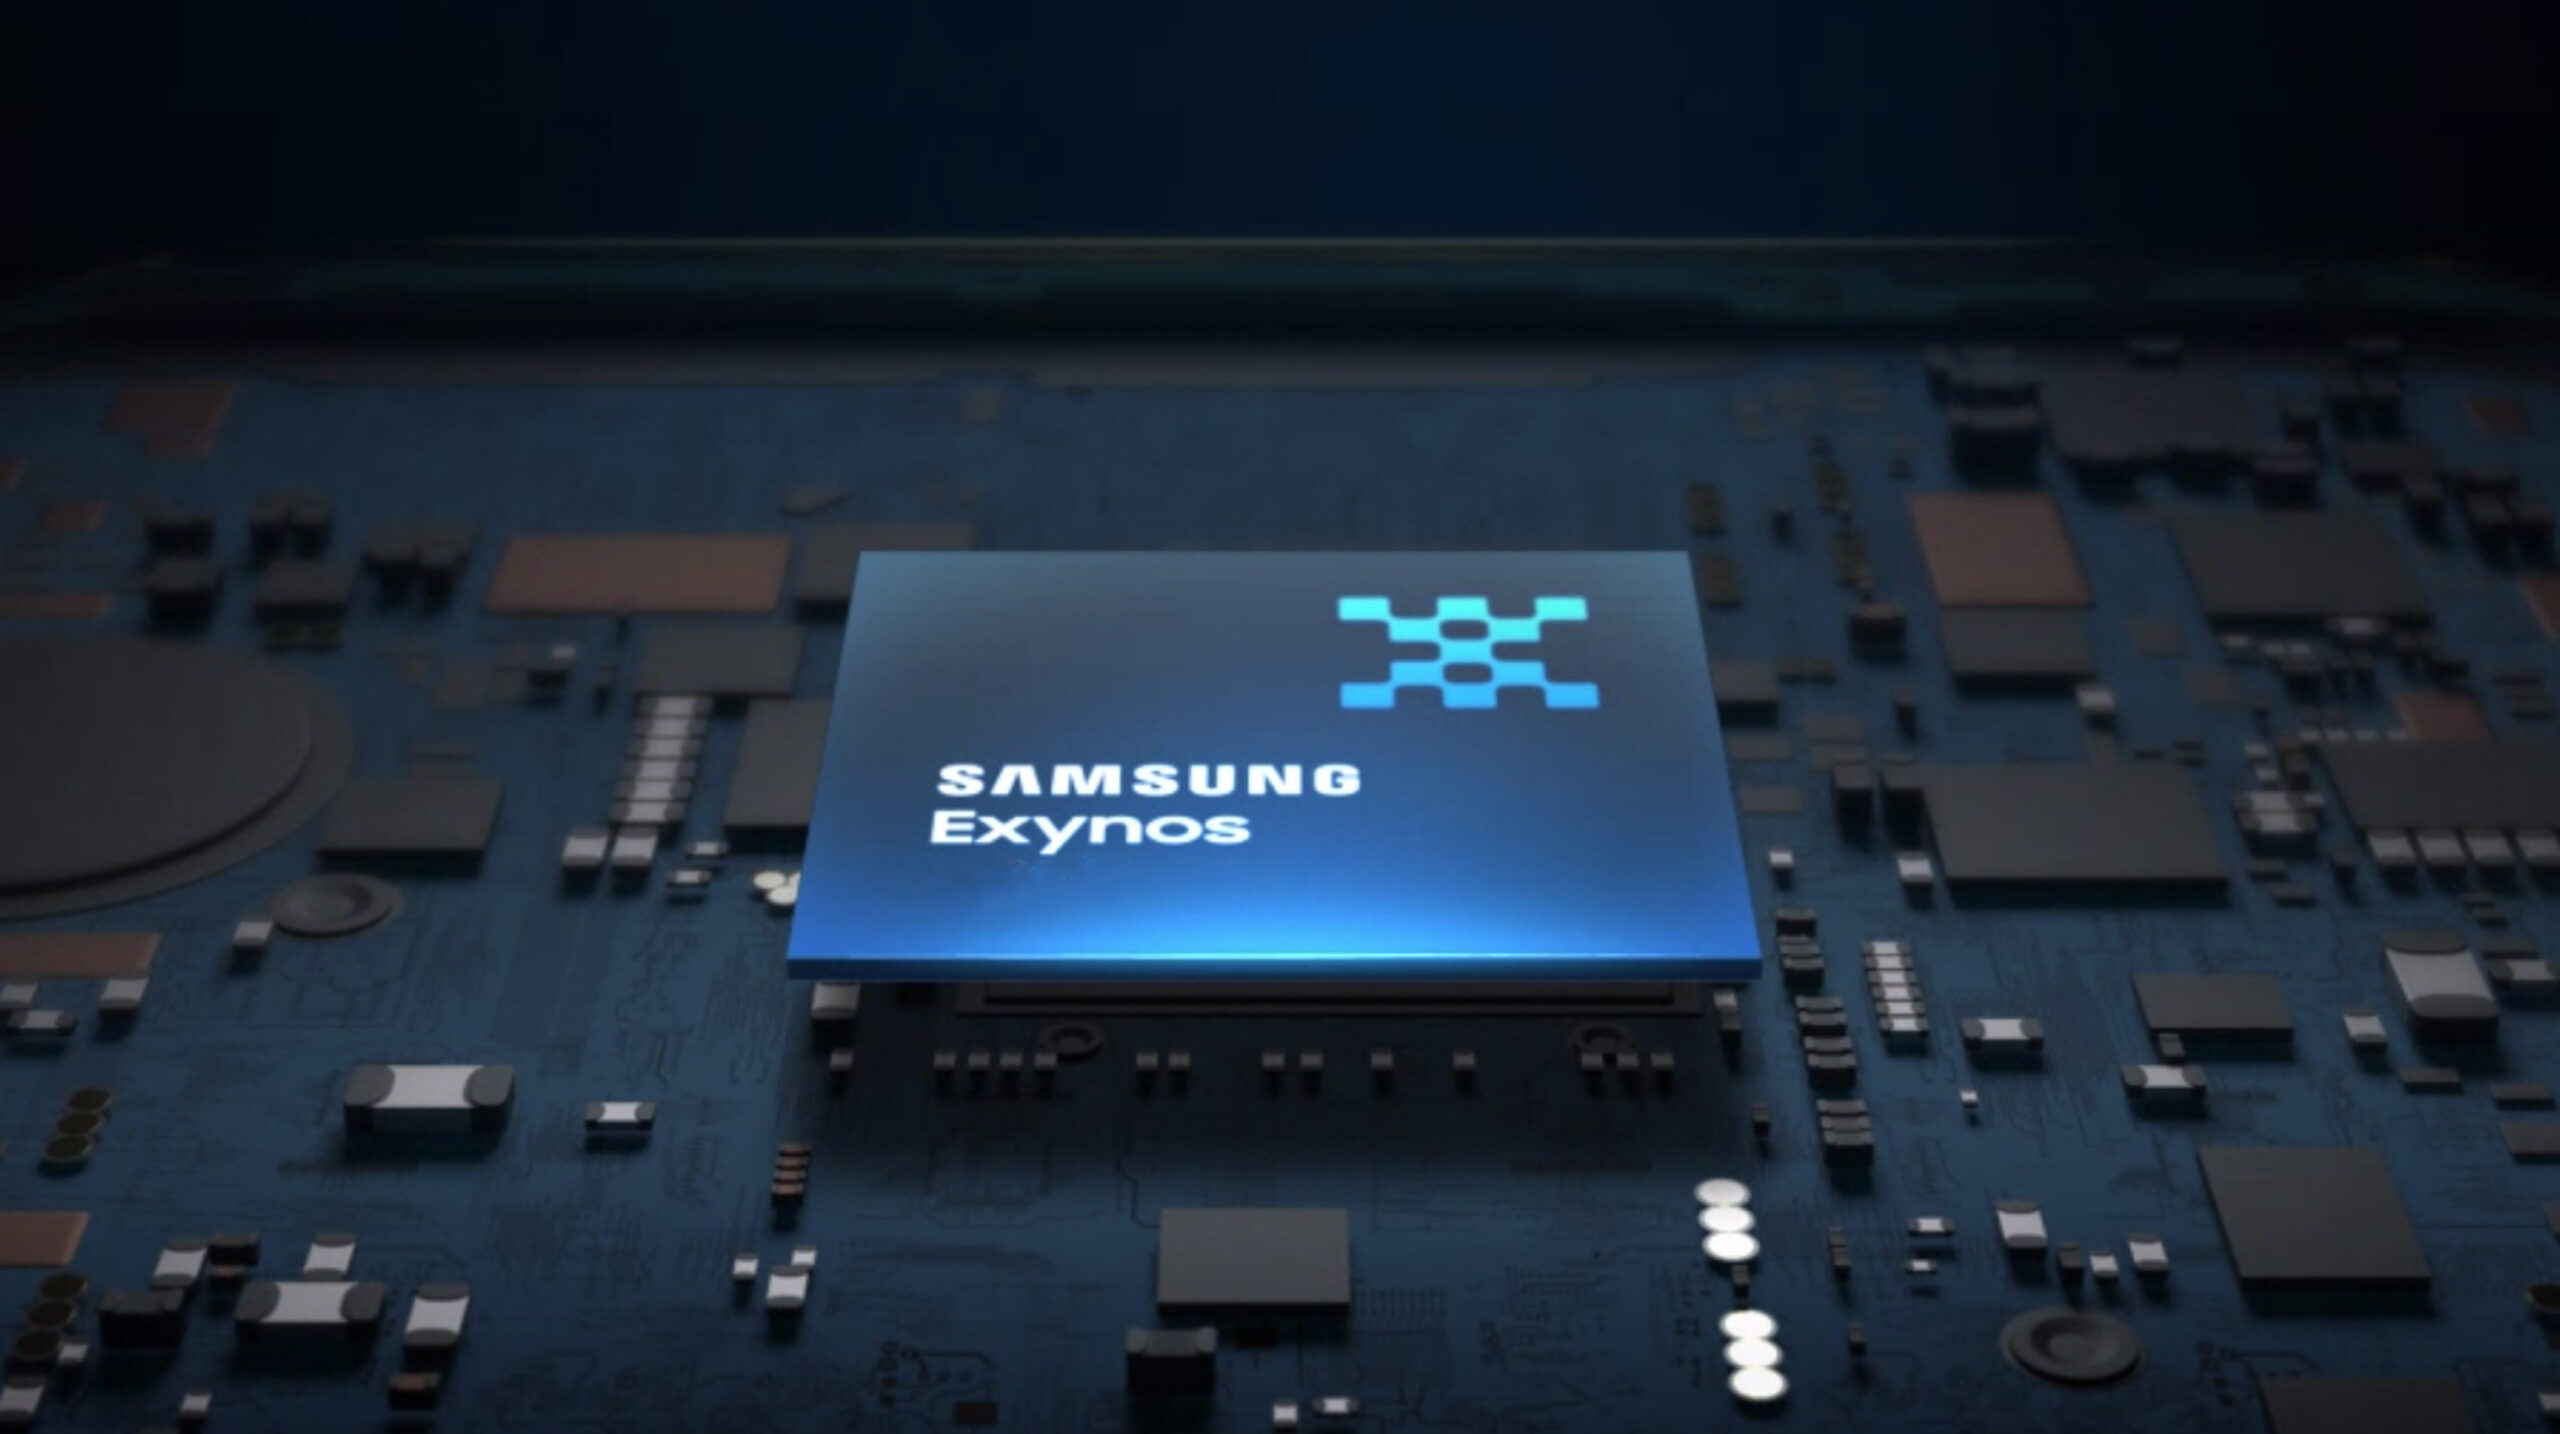 Processor for new flagship Galaxy S22: Samsung will unveil Exynos 2200 with AMD graphics on January 11